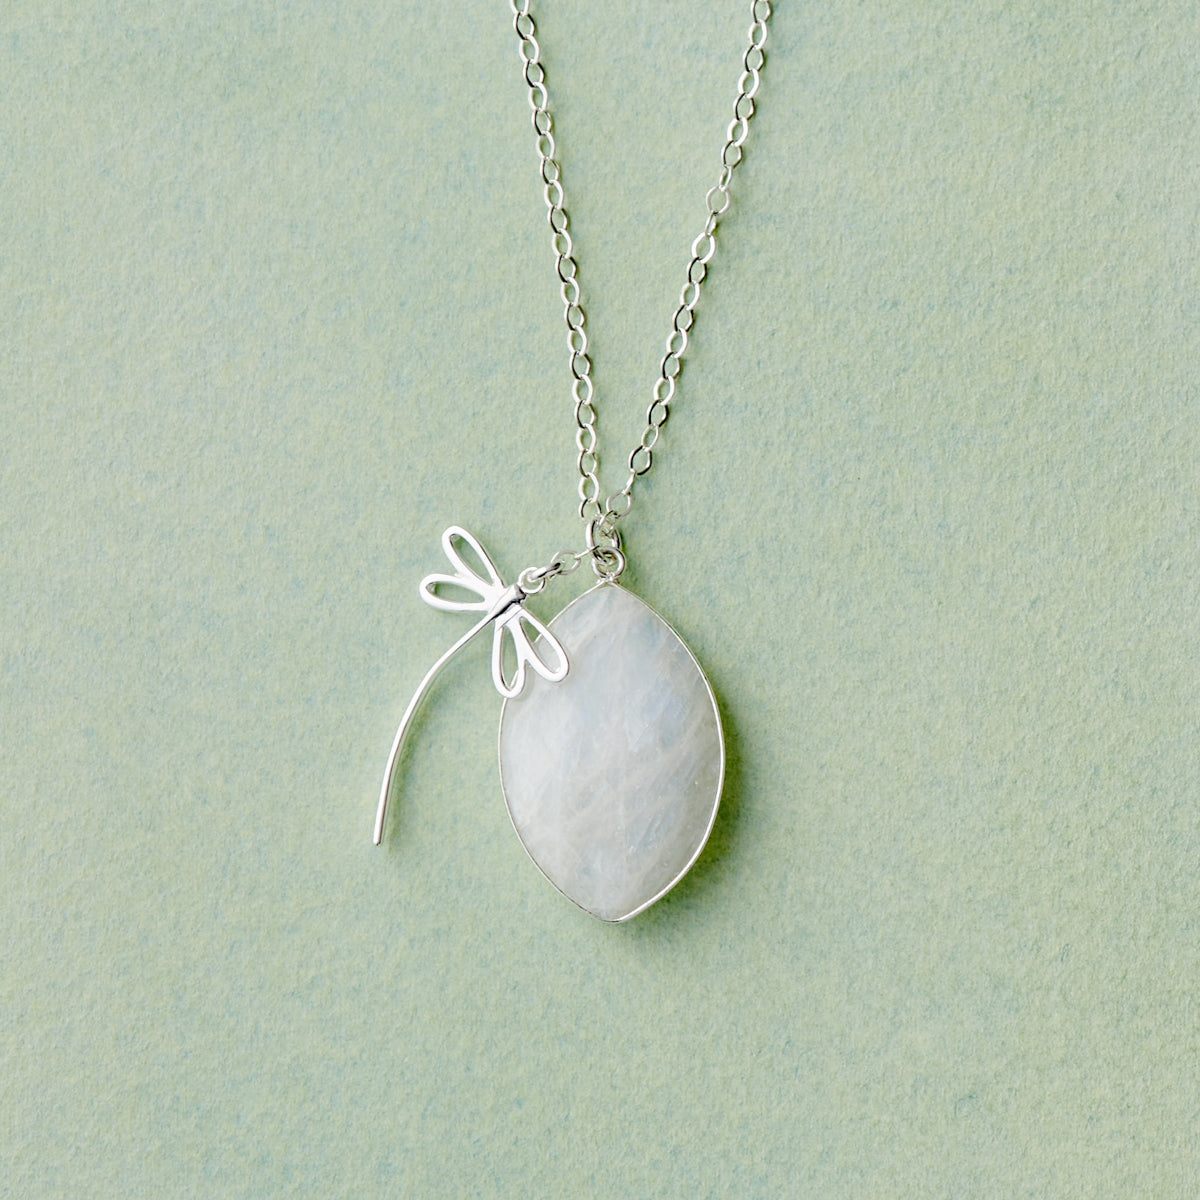 Silver Dragonfly Moonstone Necklace